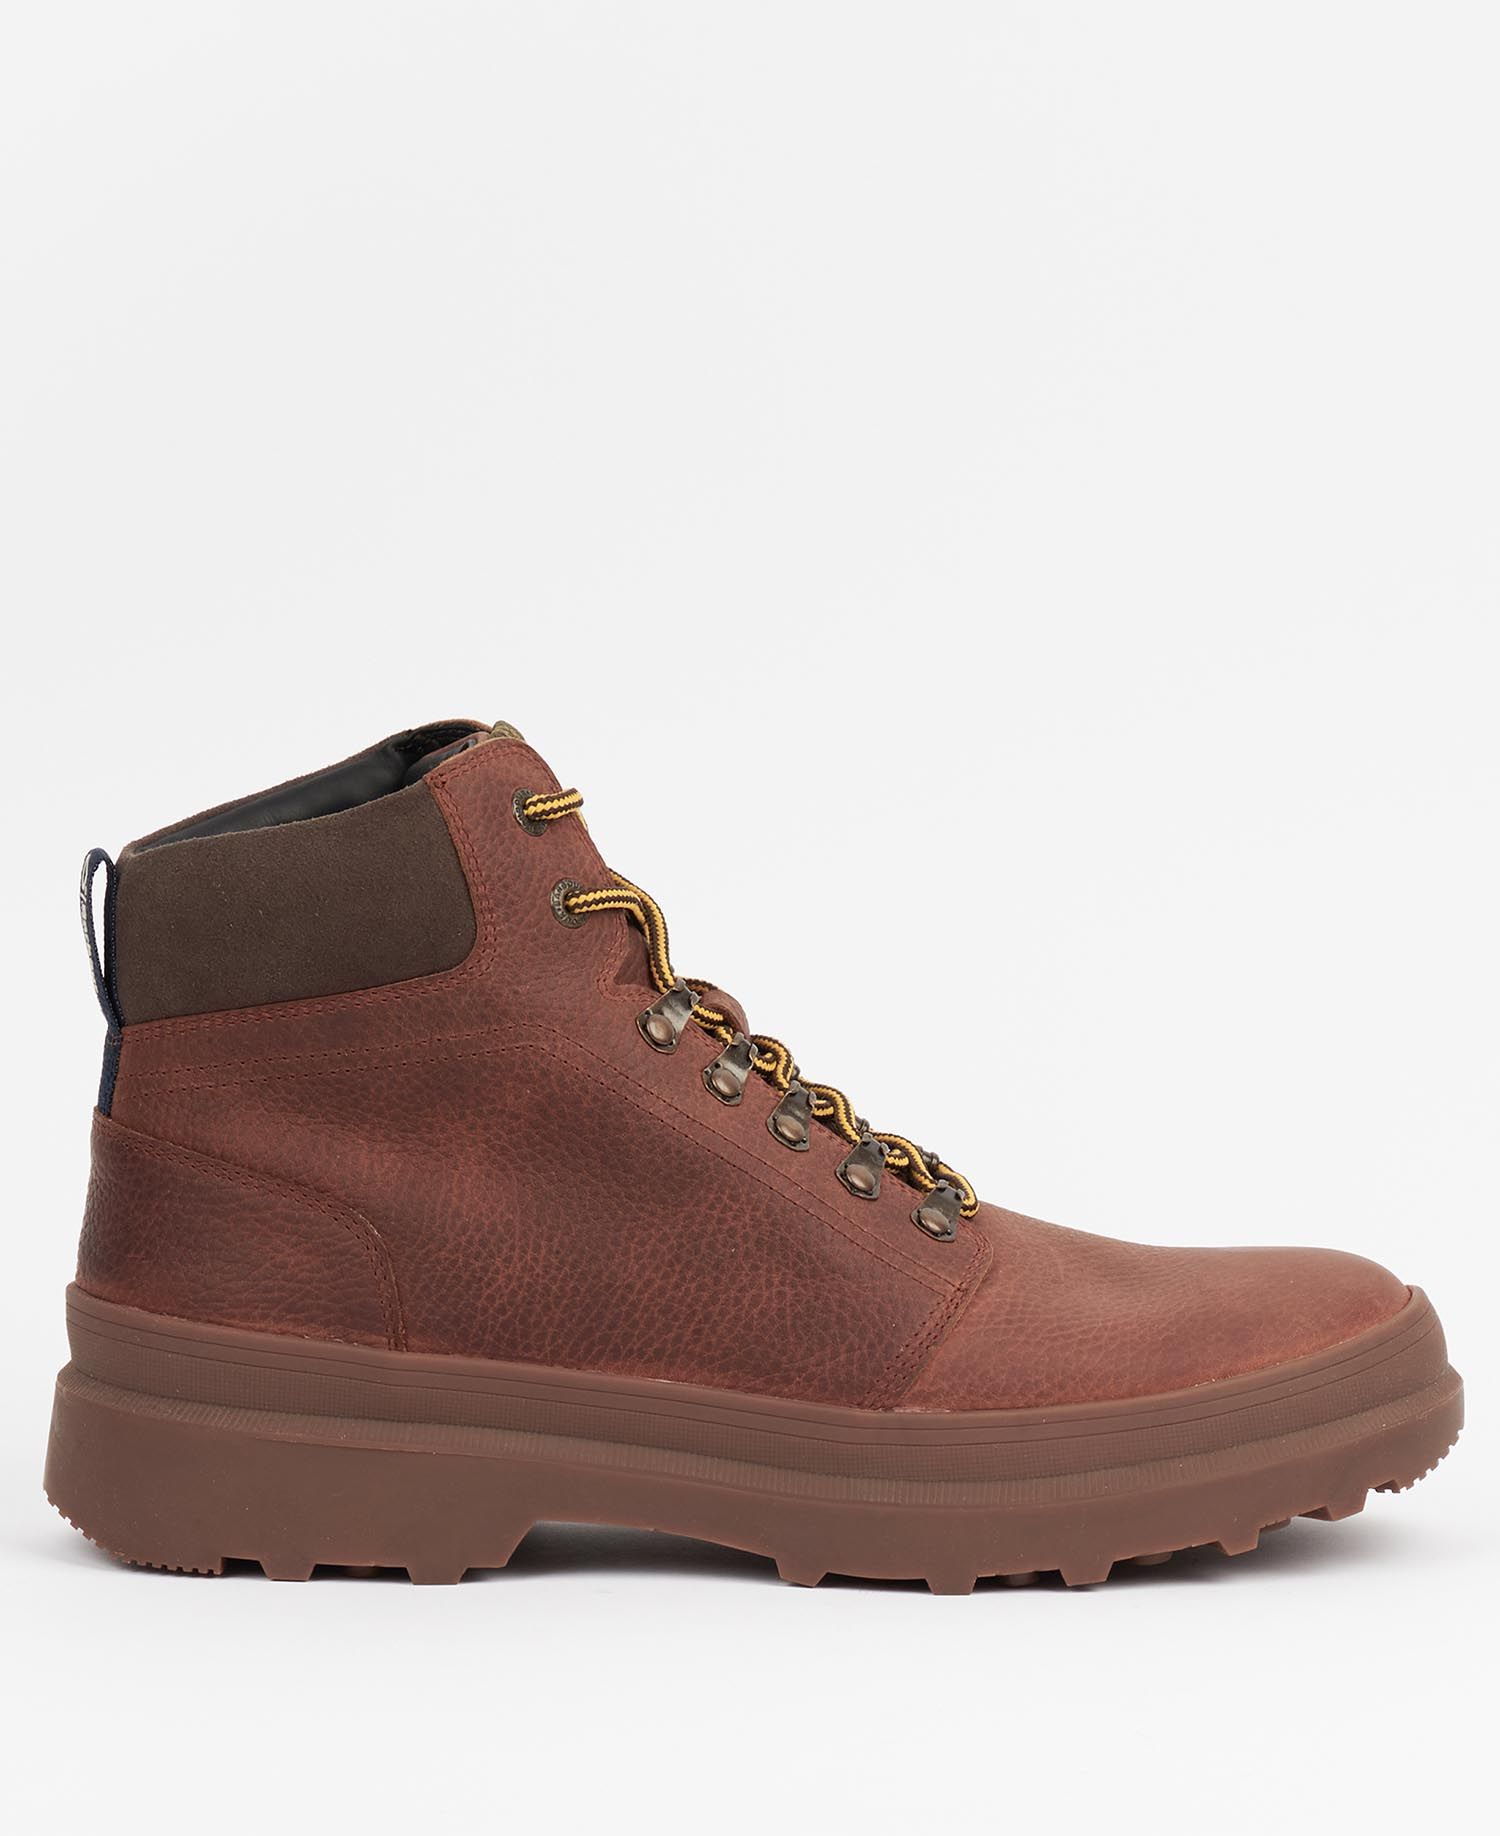 Barbour Davy Boots